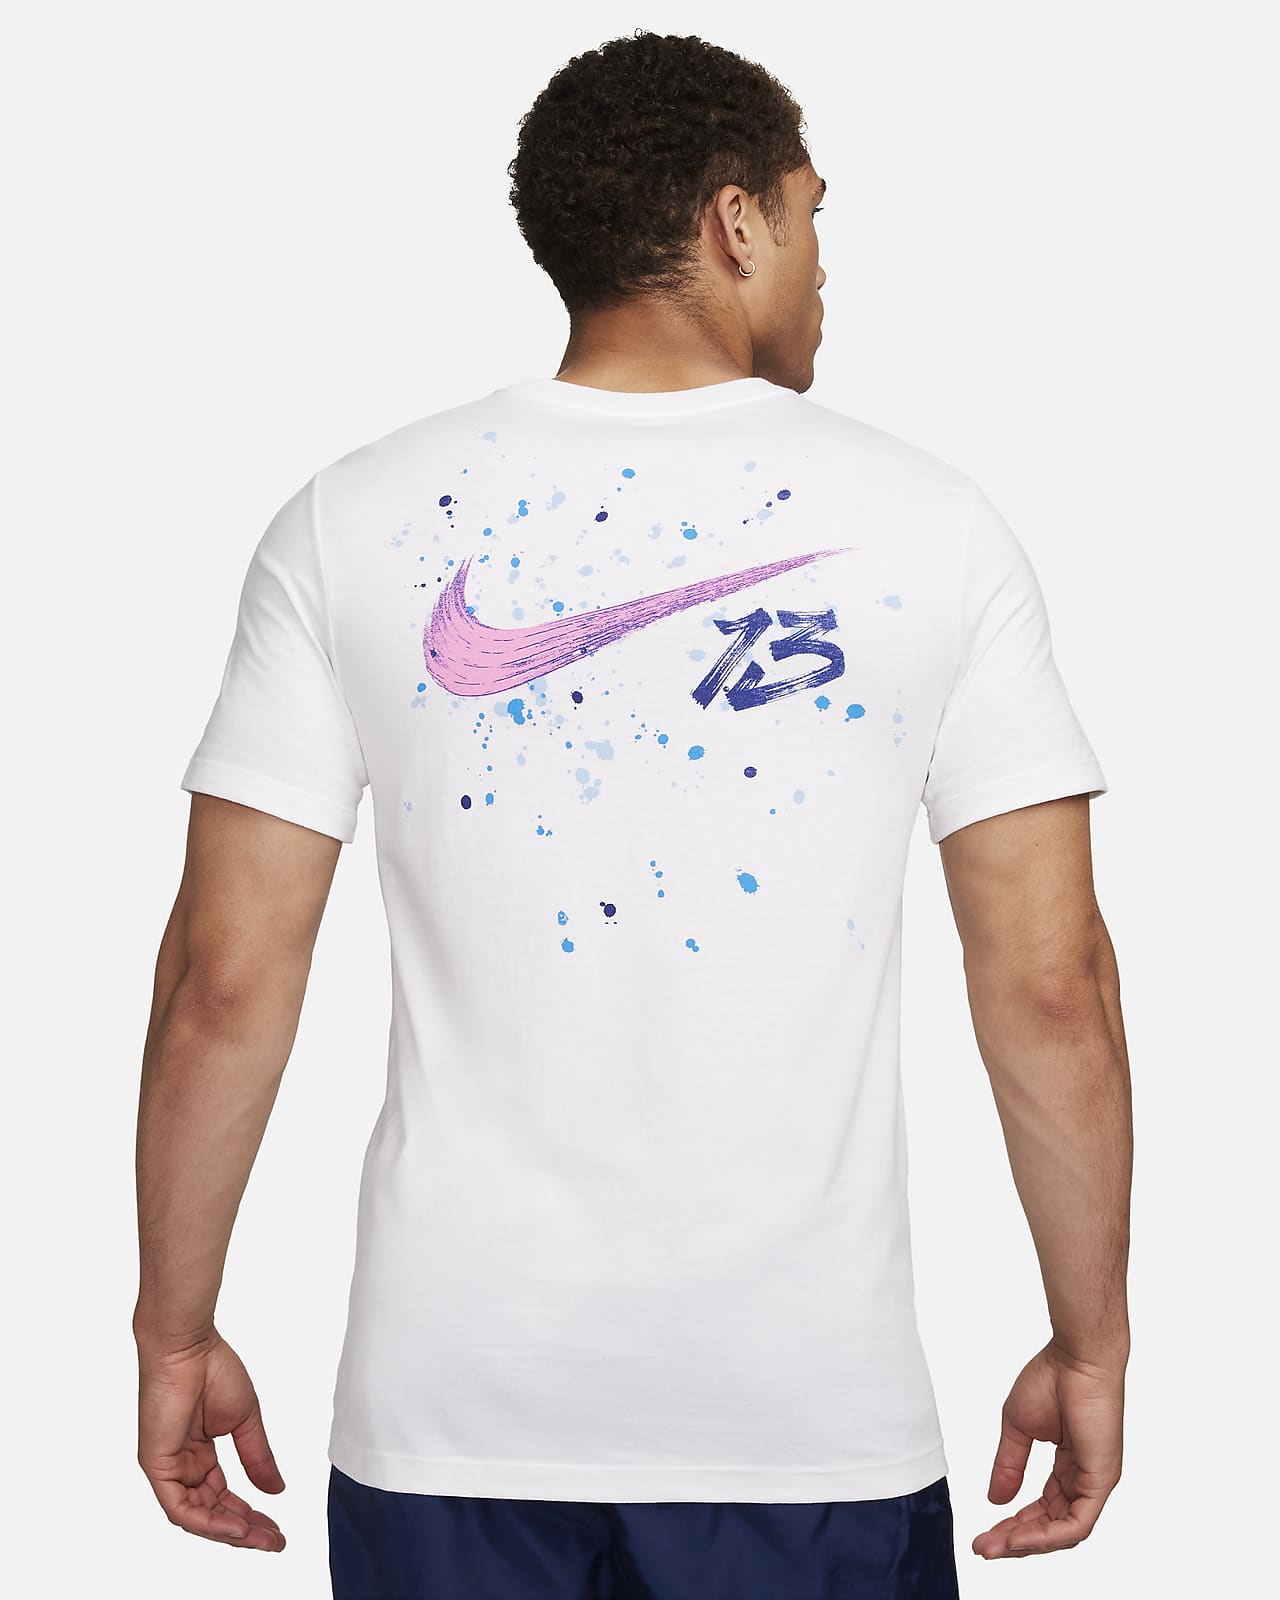 Nike, Tops, Chicago Red Stars Nwsl Nike Drifit Soccer Jersey